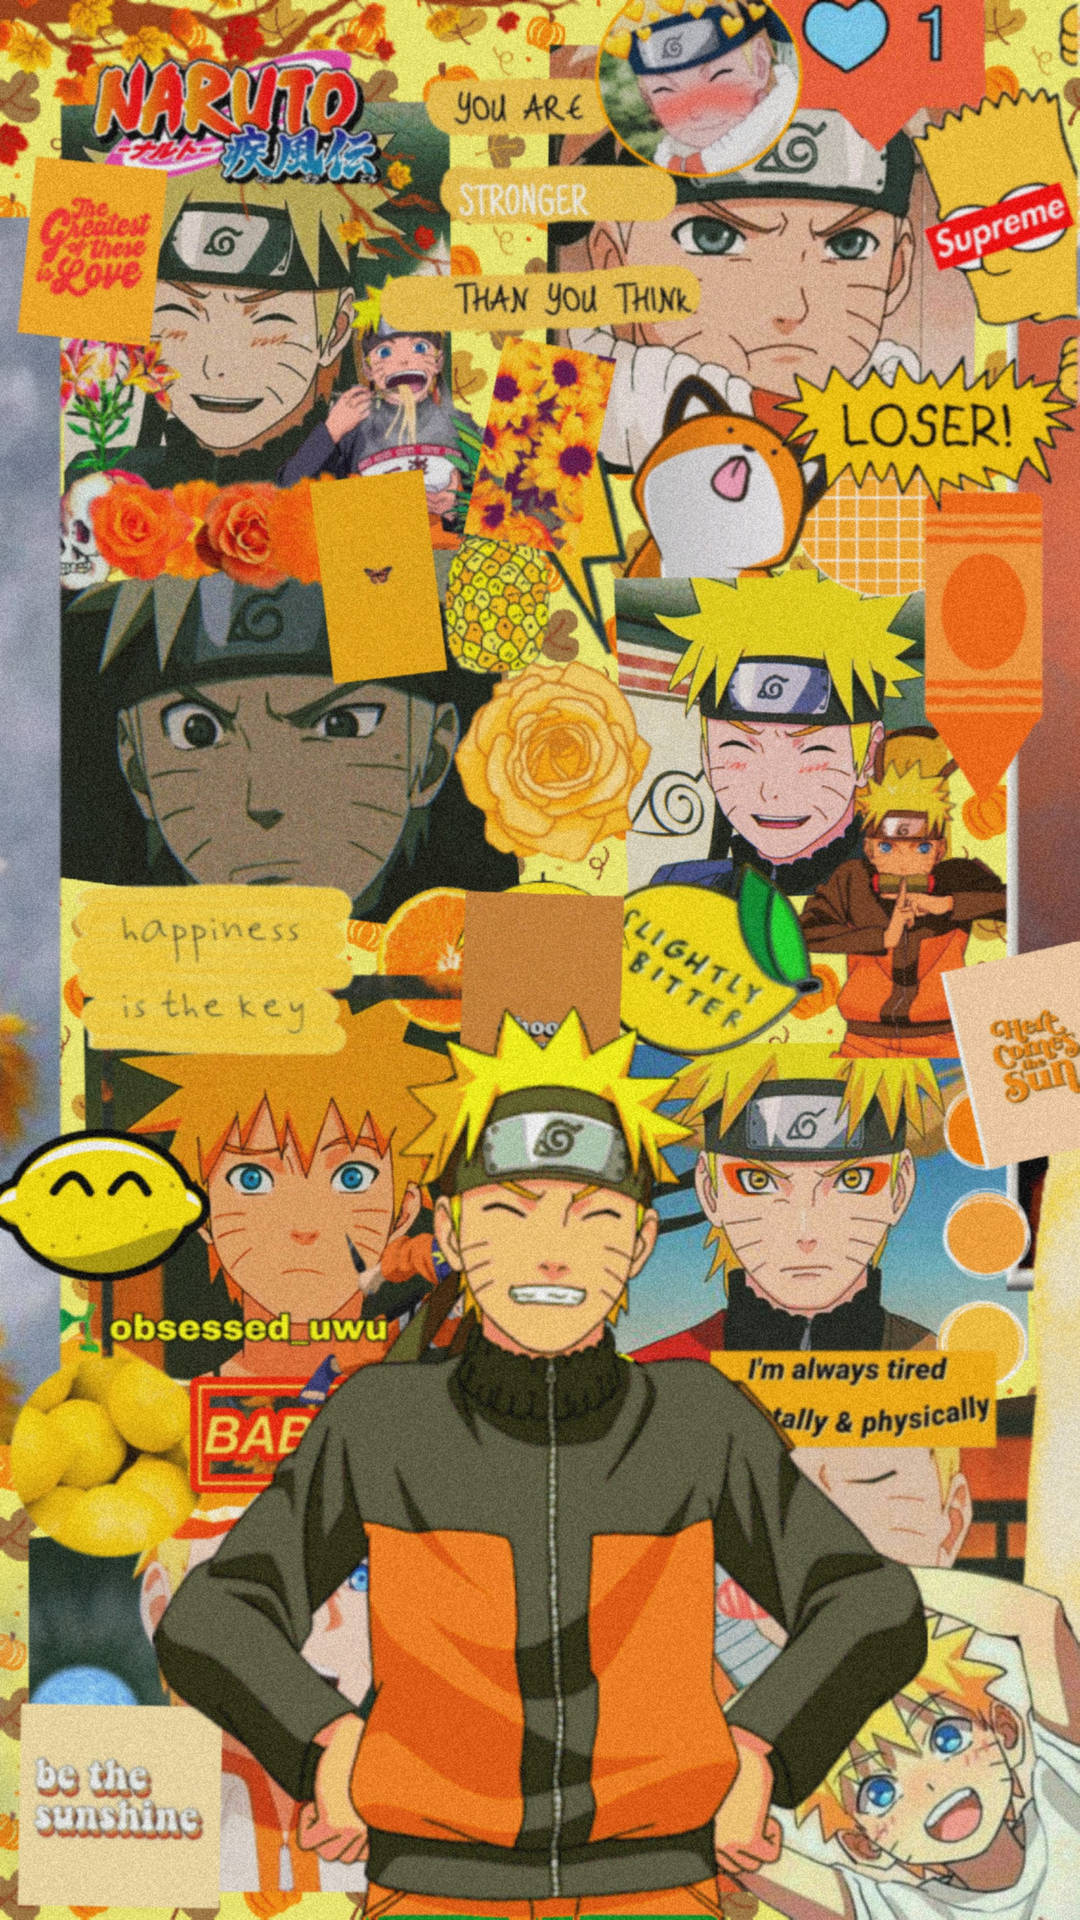 "Journey through the world of Naruto in a daring new way with the help of Yellow Naruto!" Wallpaper